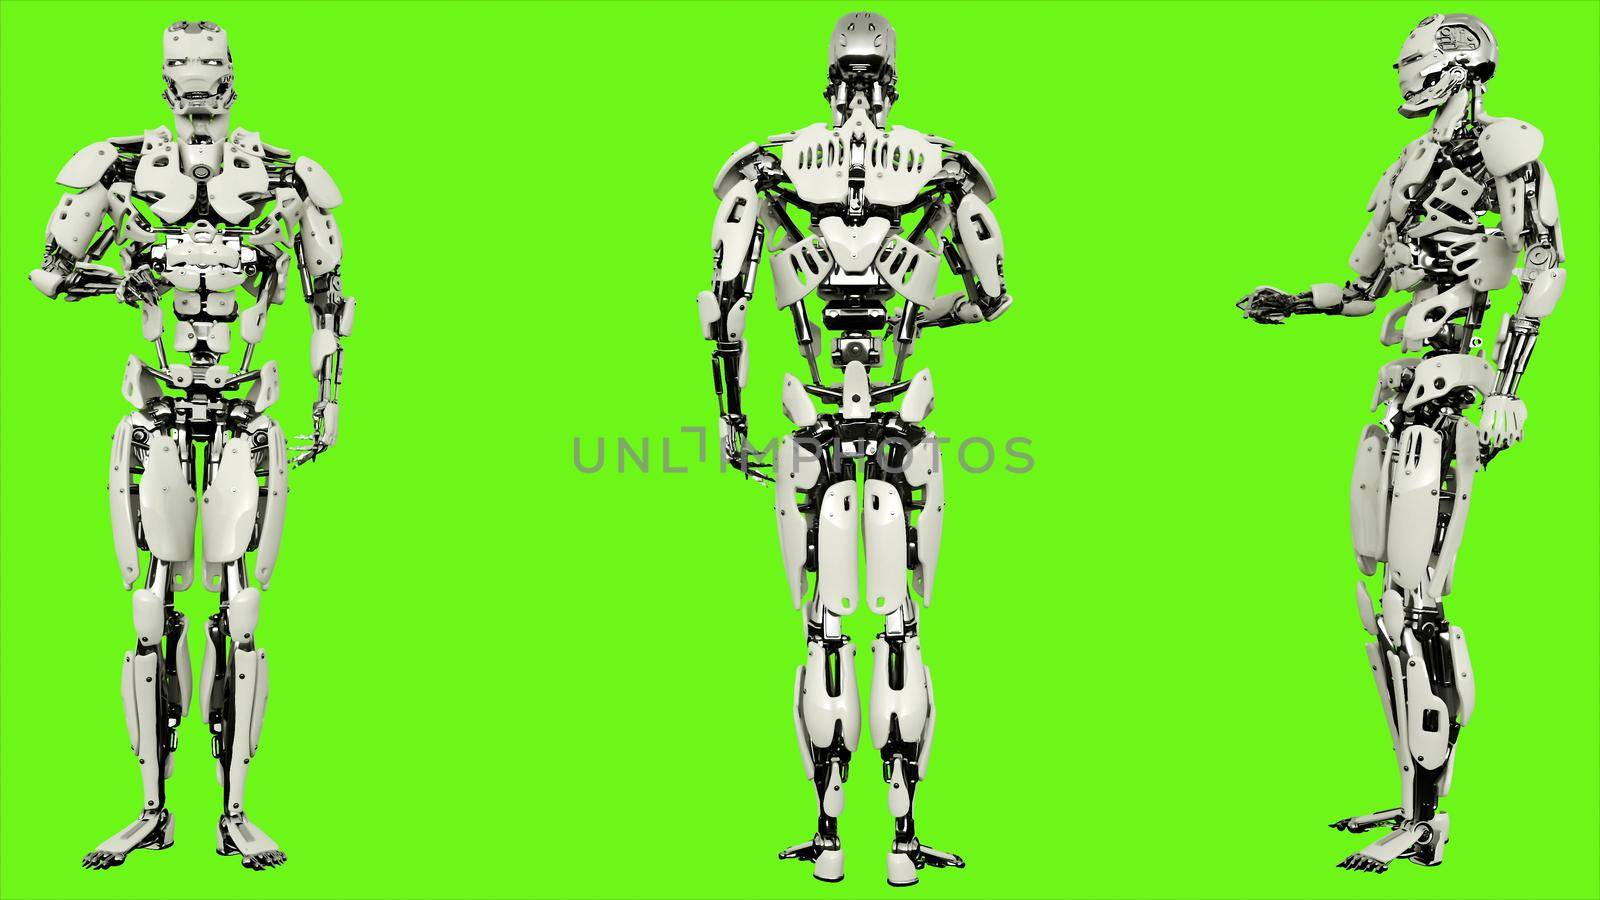 Robot android is presses the button. Illustration on green screen background.